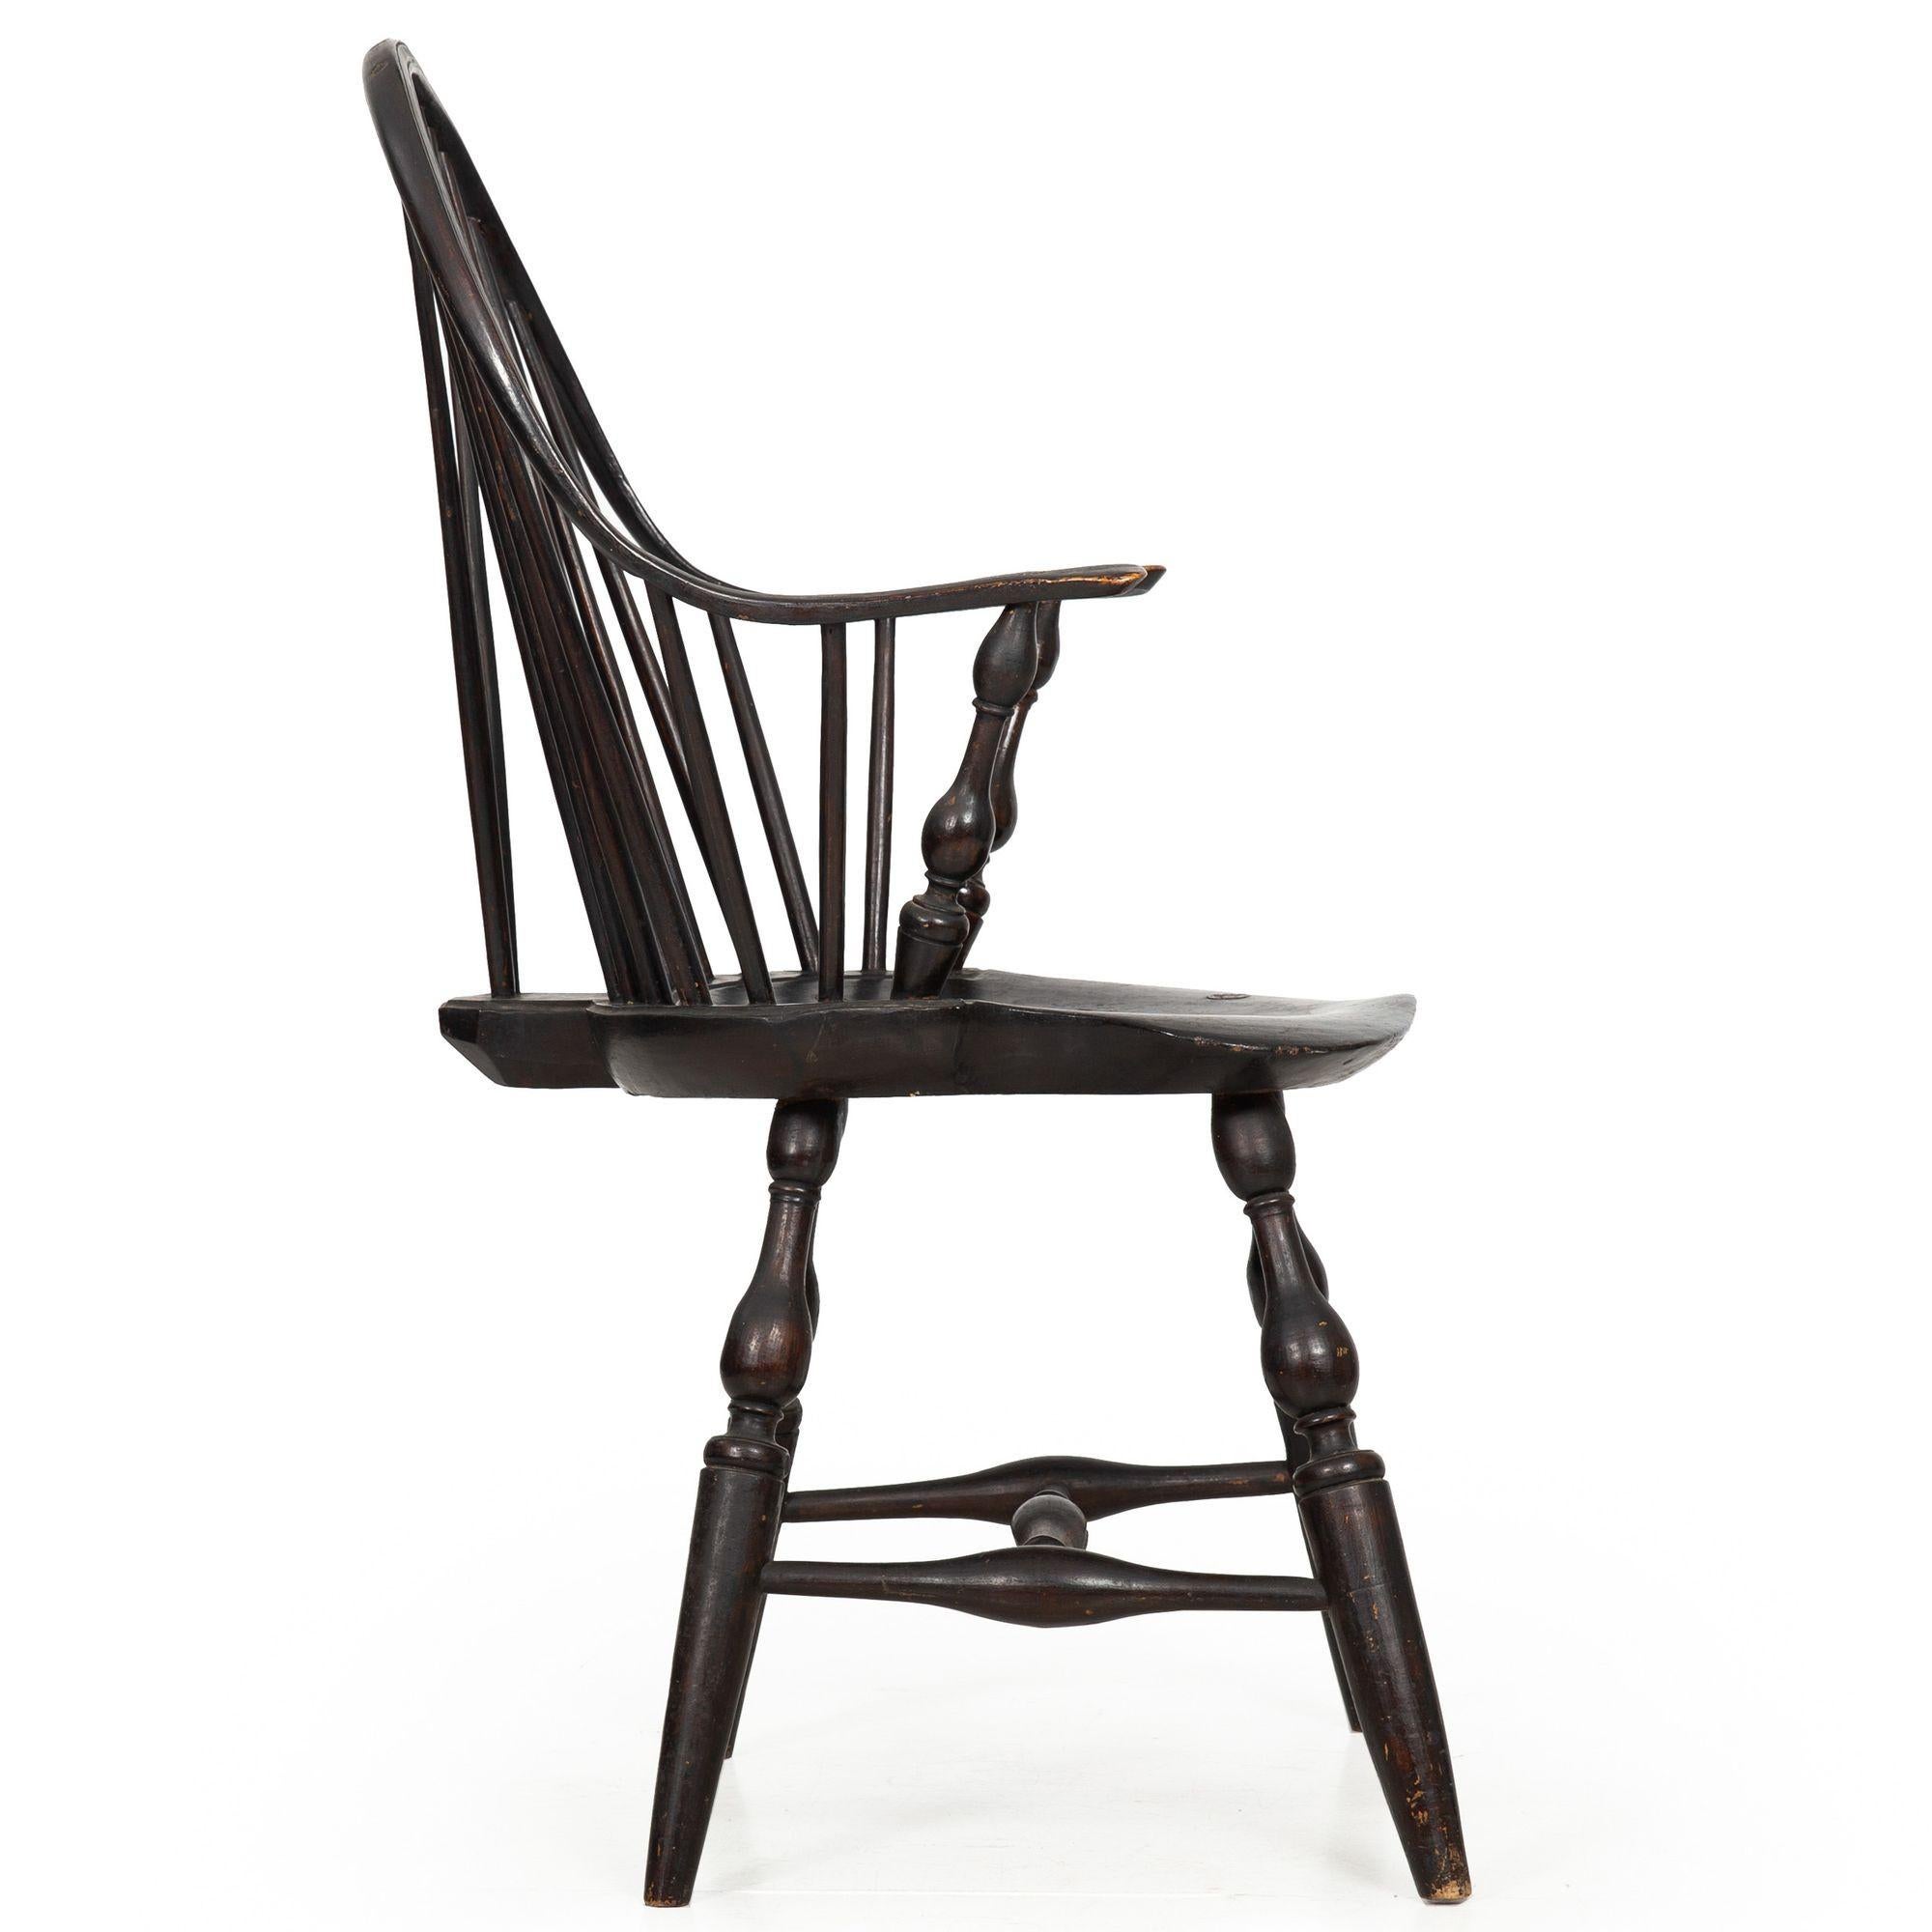 Wood Rare American Brace-Back Continuous Arm Windsor Chair, New York ca. 1790